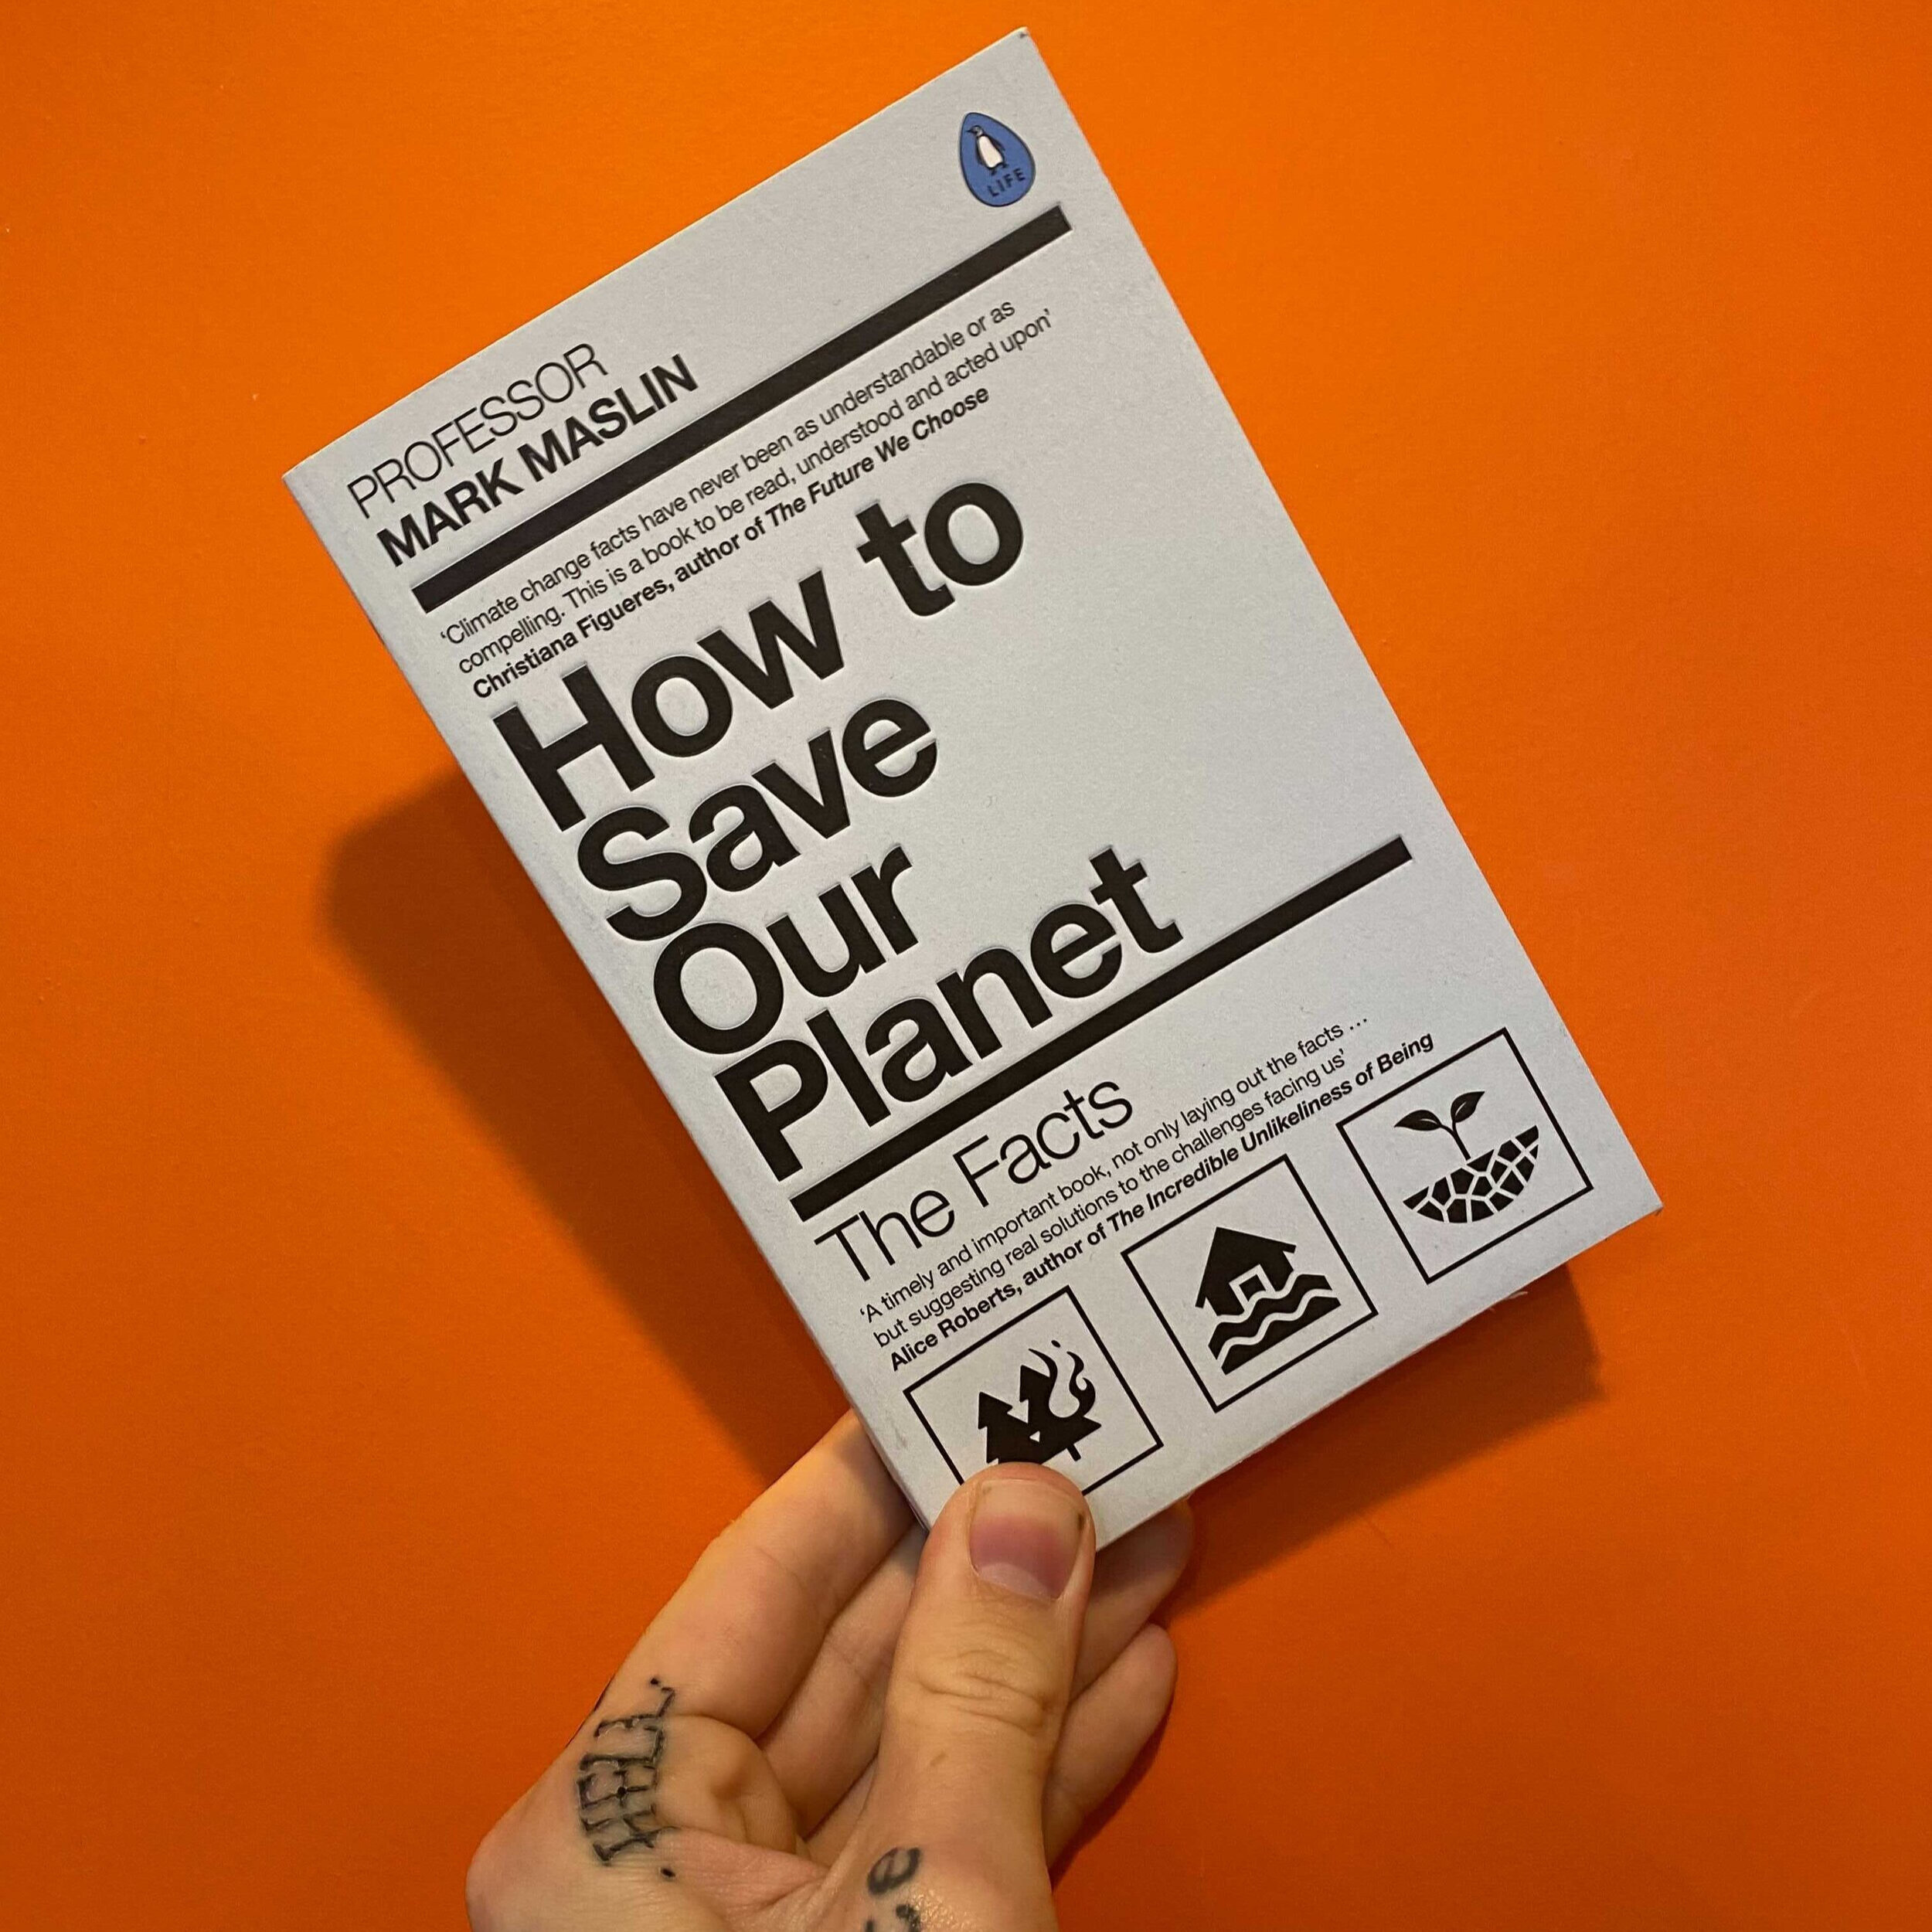 How To Save Our Planet by Professor Mark Maslin